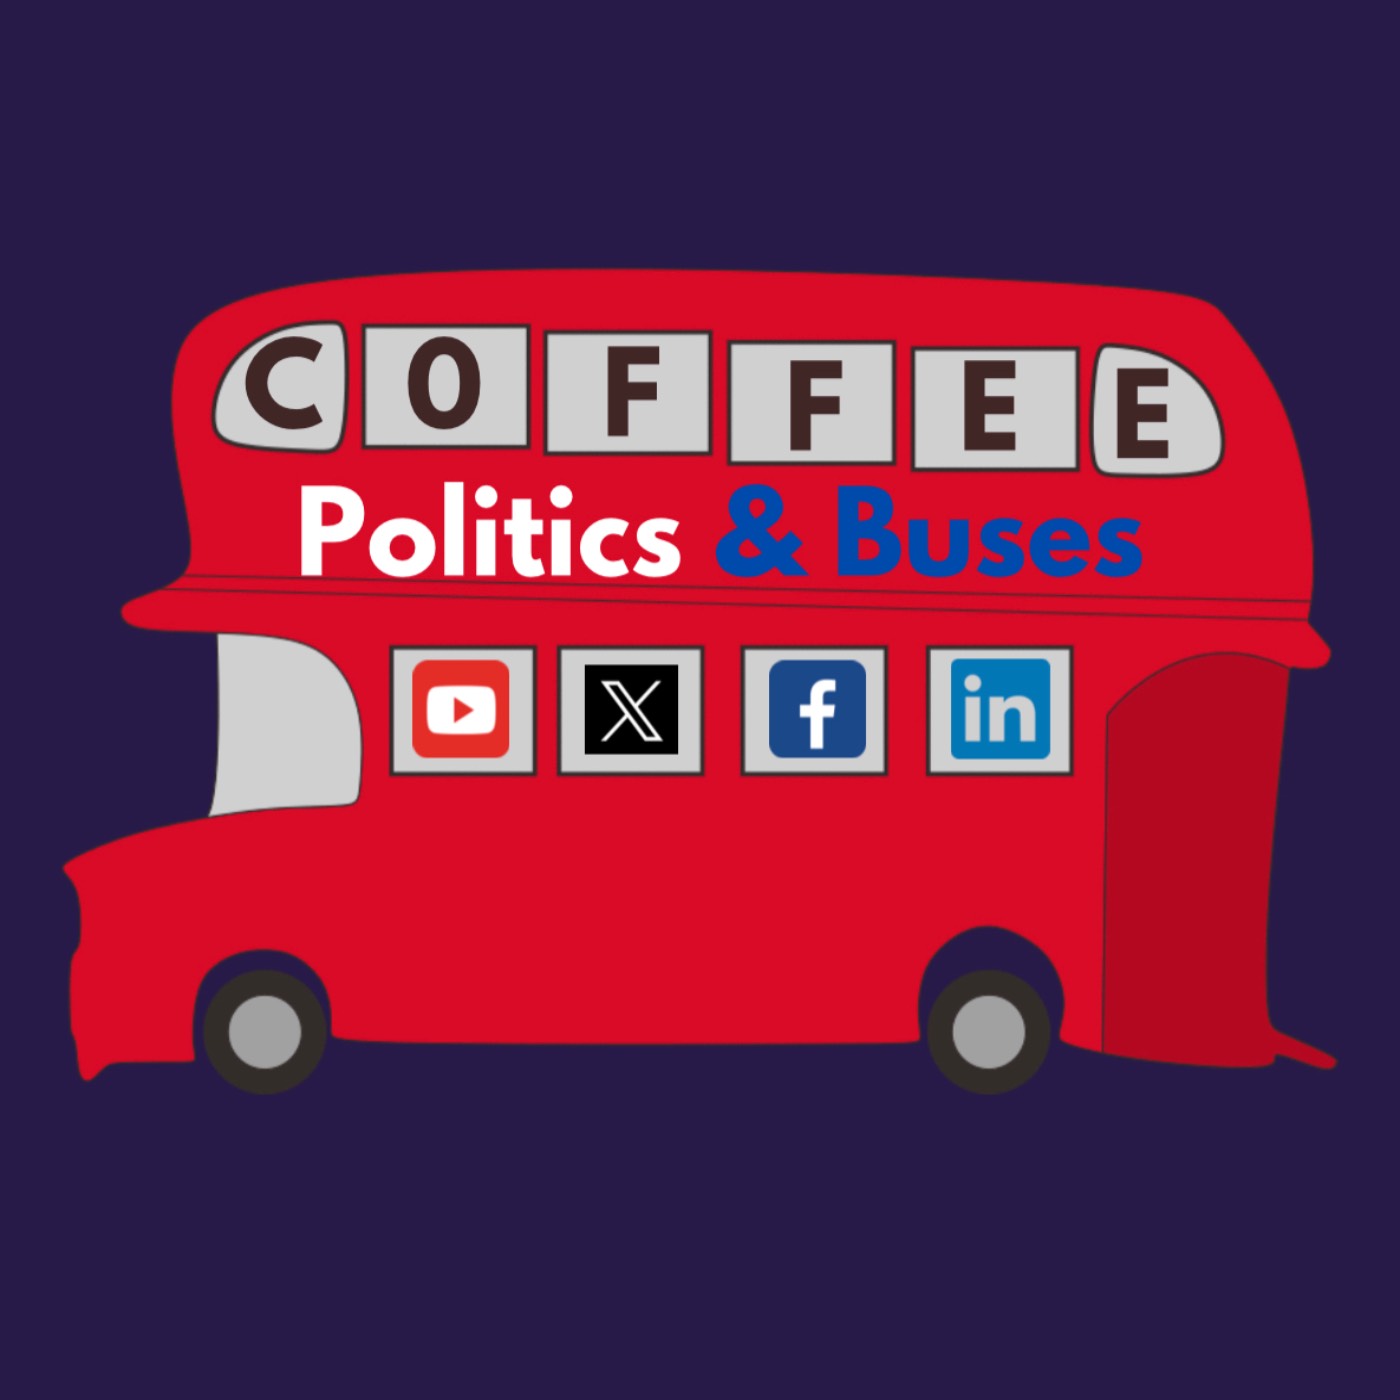 Artwork for Coffee, Buses and Politics